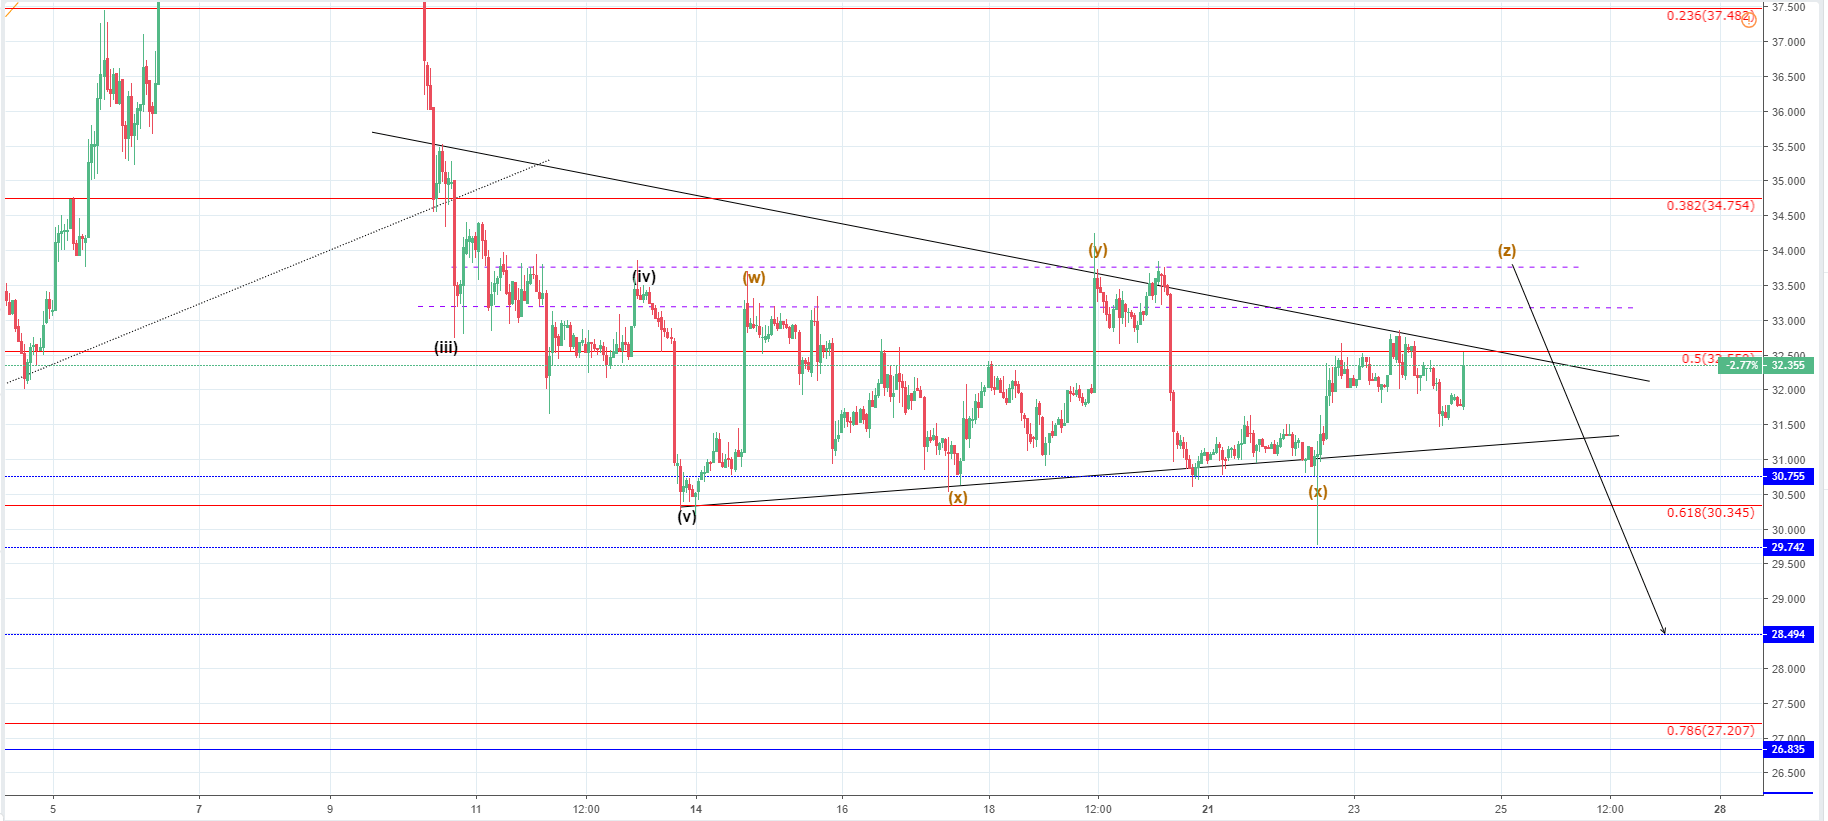 LTC/USD and EOS/USD - one more spike up before further downside is expected